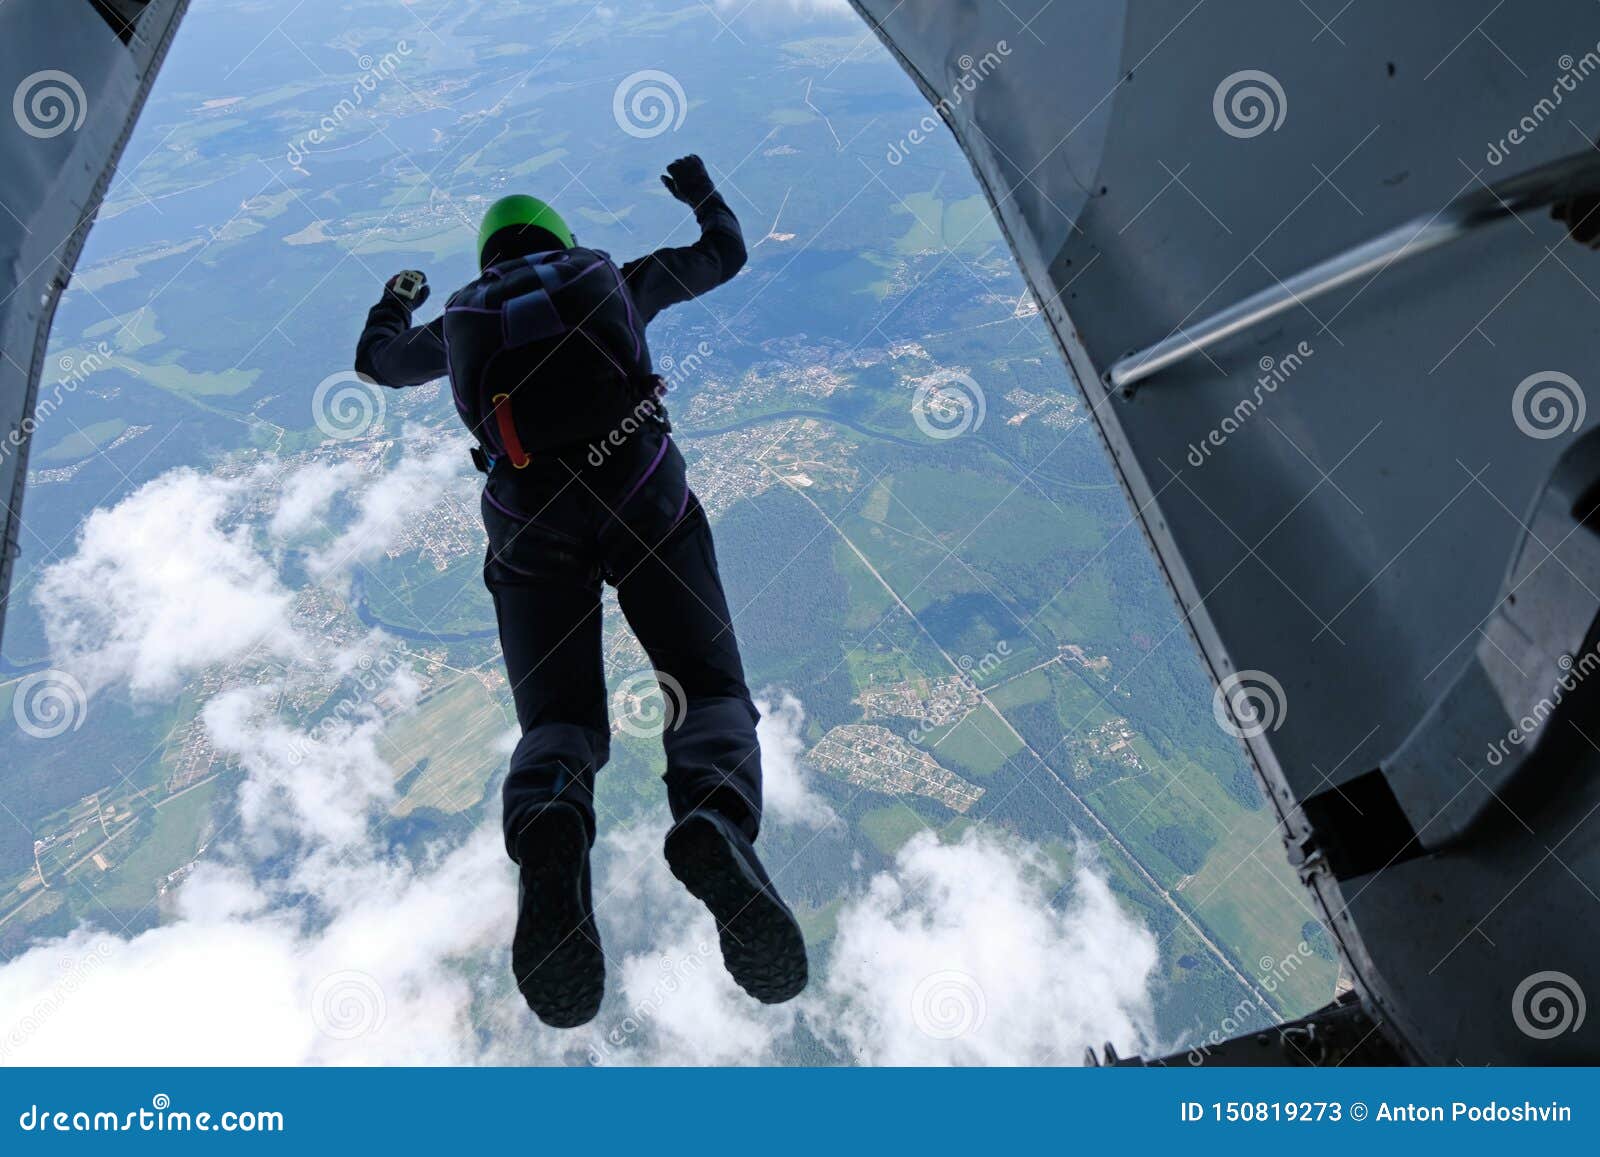 skydiving. a skydiver is jumping out of a plane.